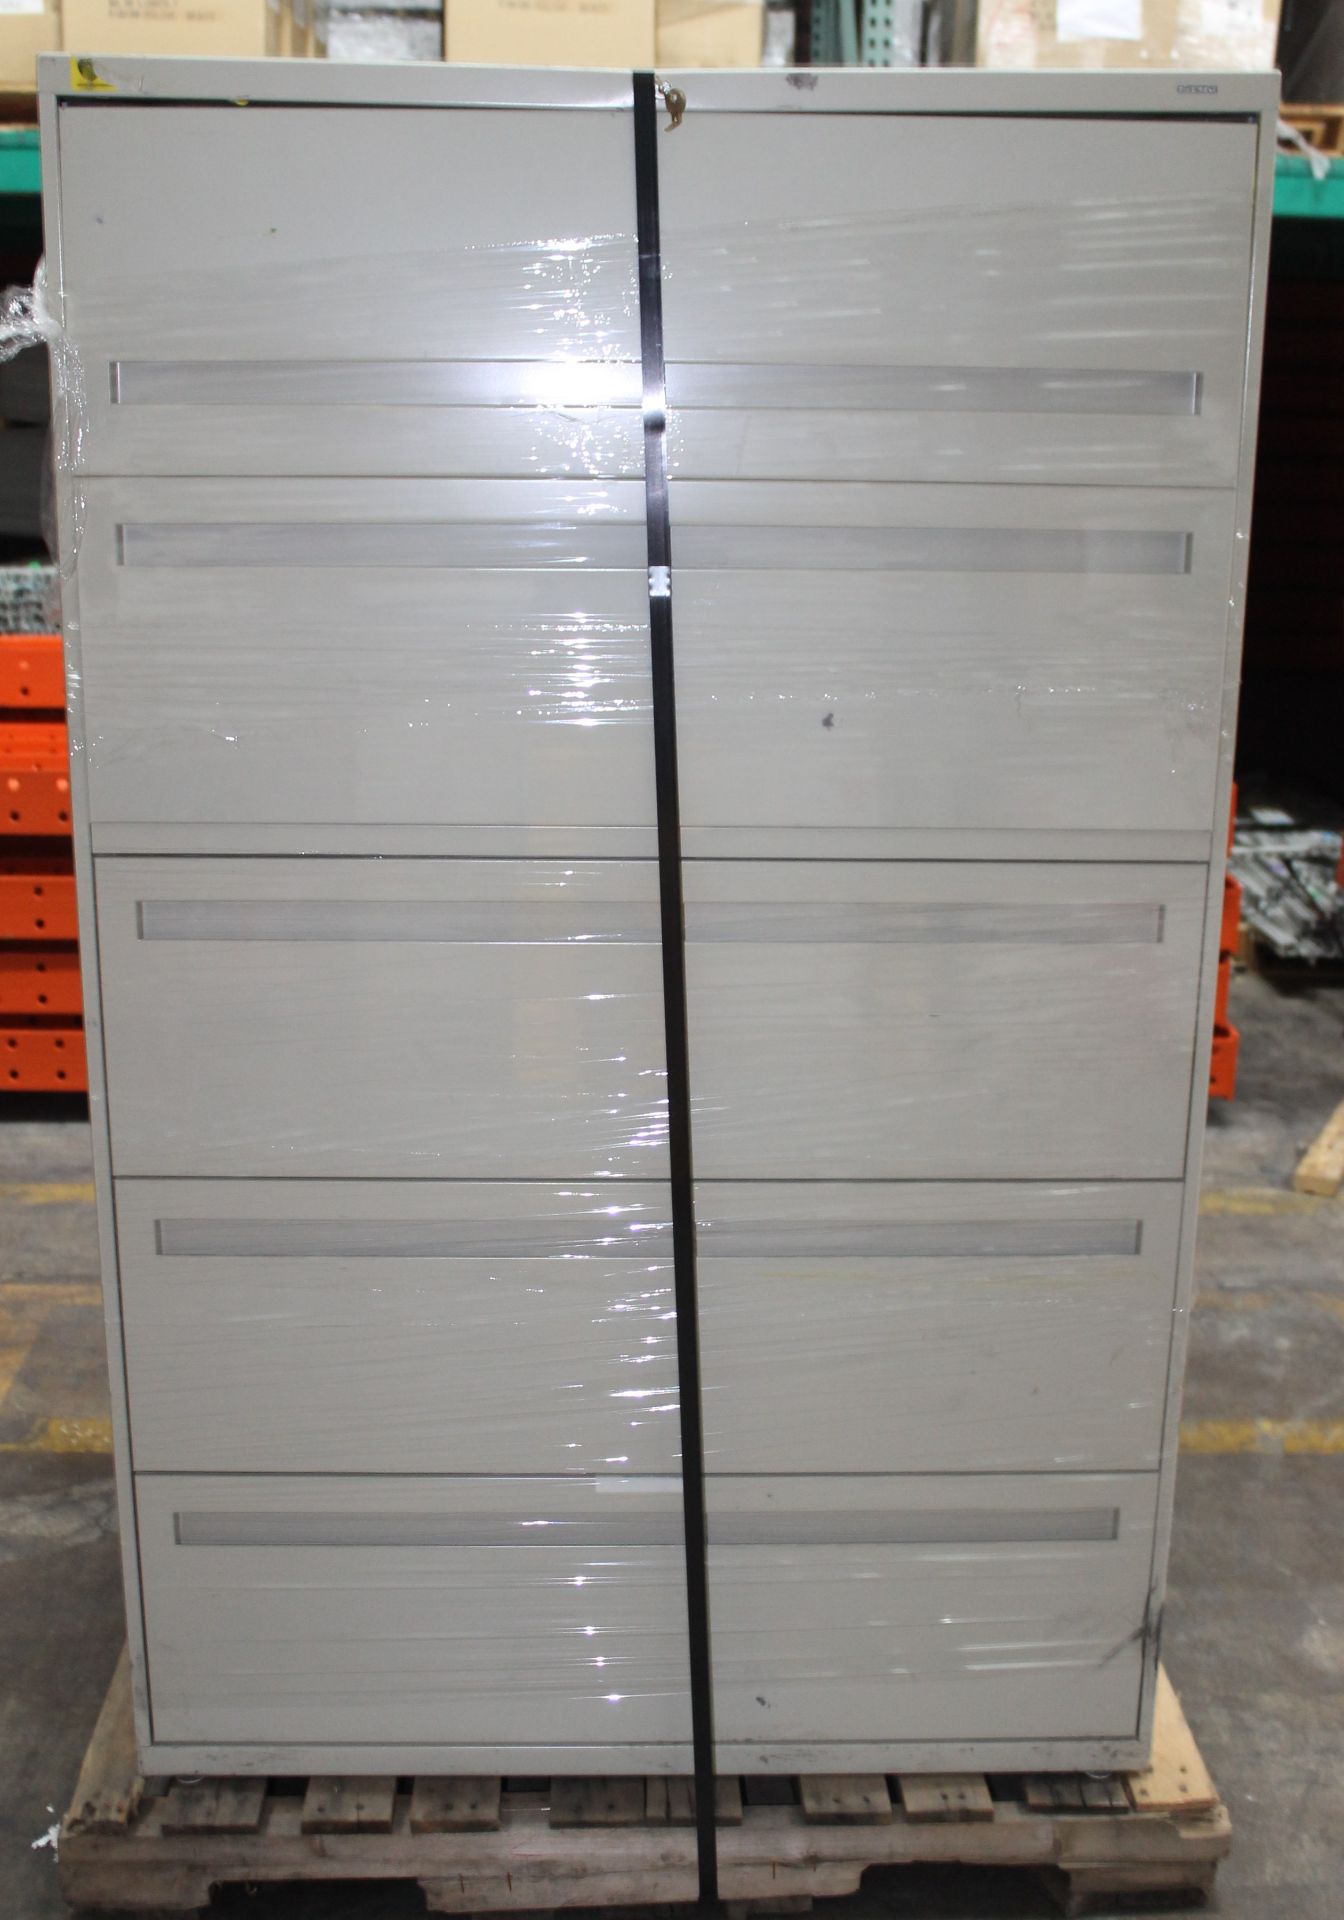 5 DRAWER LATERAL FILE CABINET,  ONE SIZE: 42"W X 19"D X 67"H, ONE PCS SIZE: 36"W X 18"D X 64"H, 2